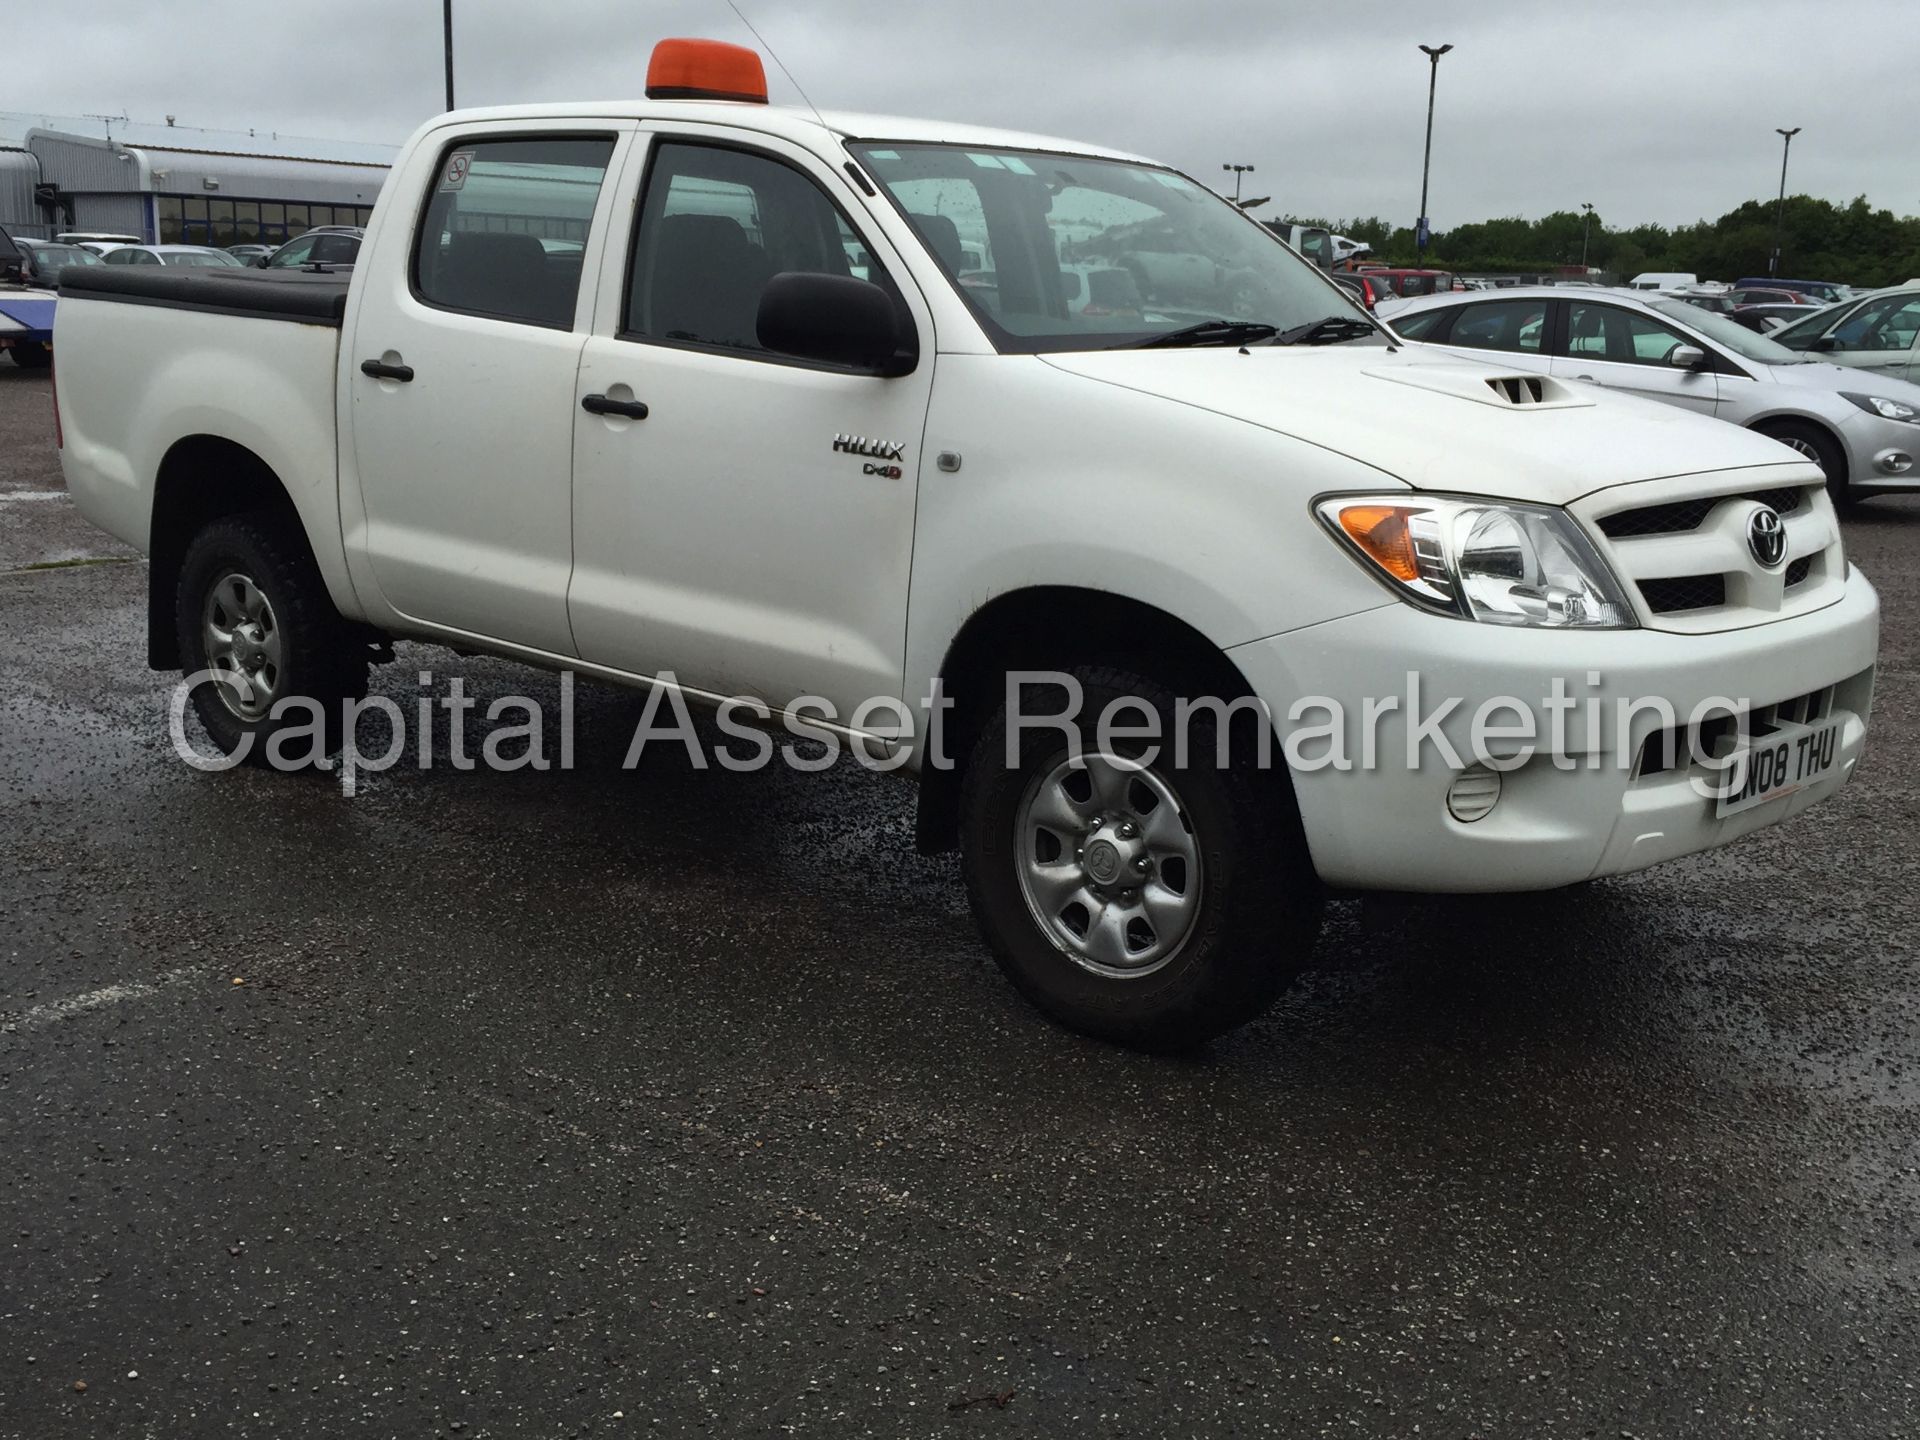 TOYOTA HILUX D-4D '171 BHP' (2008 - 08 REG) DOUBLE CAB PICK-UP (1 OWNER FROM NEW) - Image 8 of 23